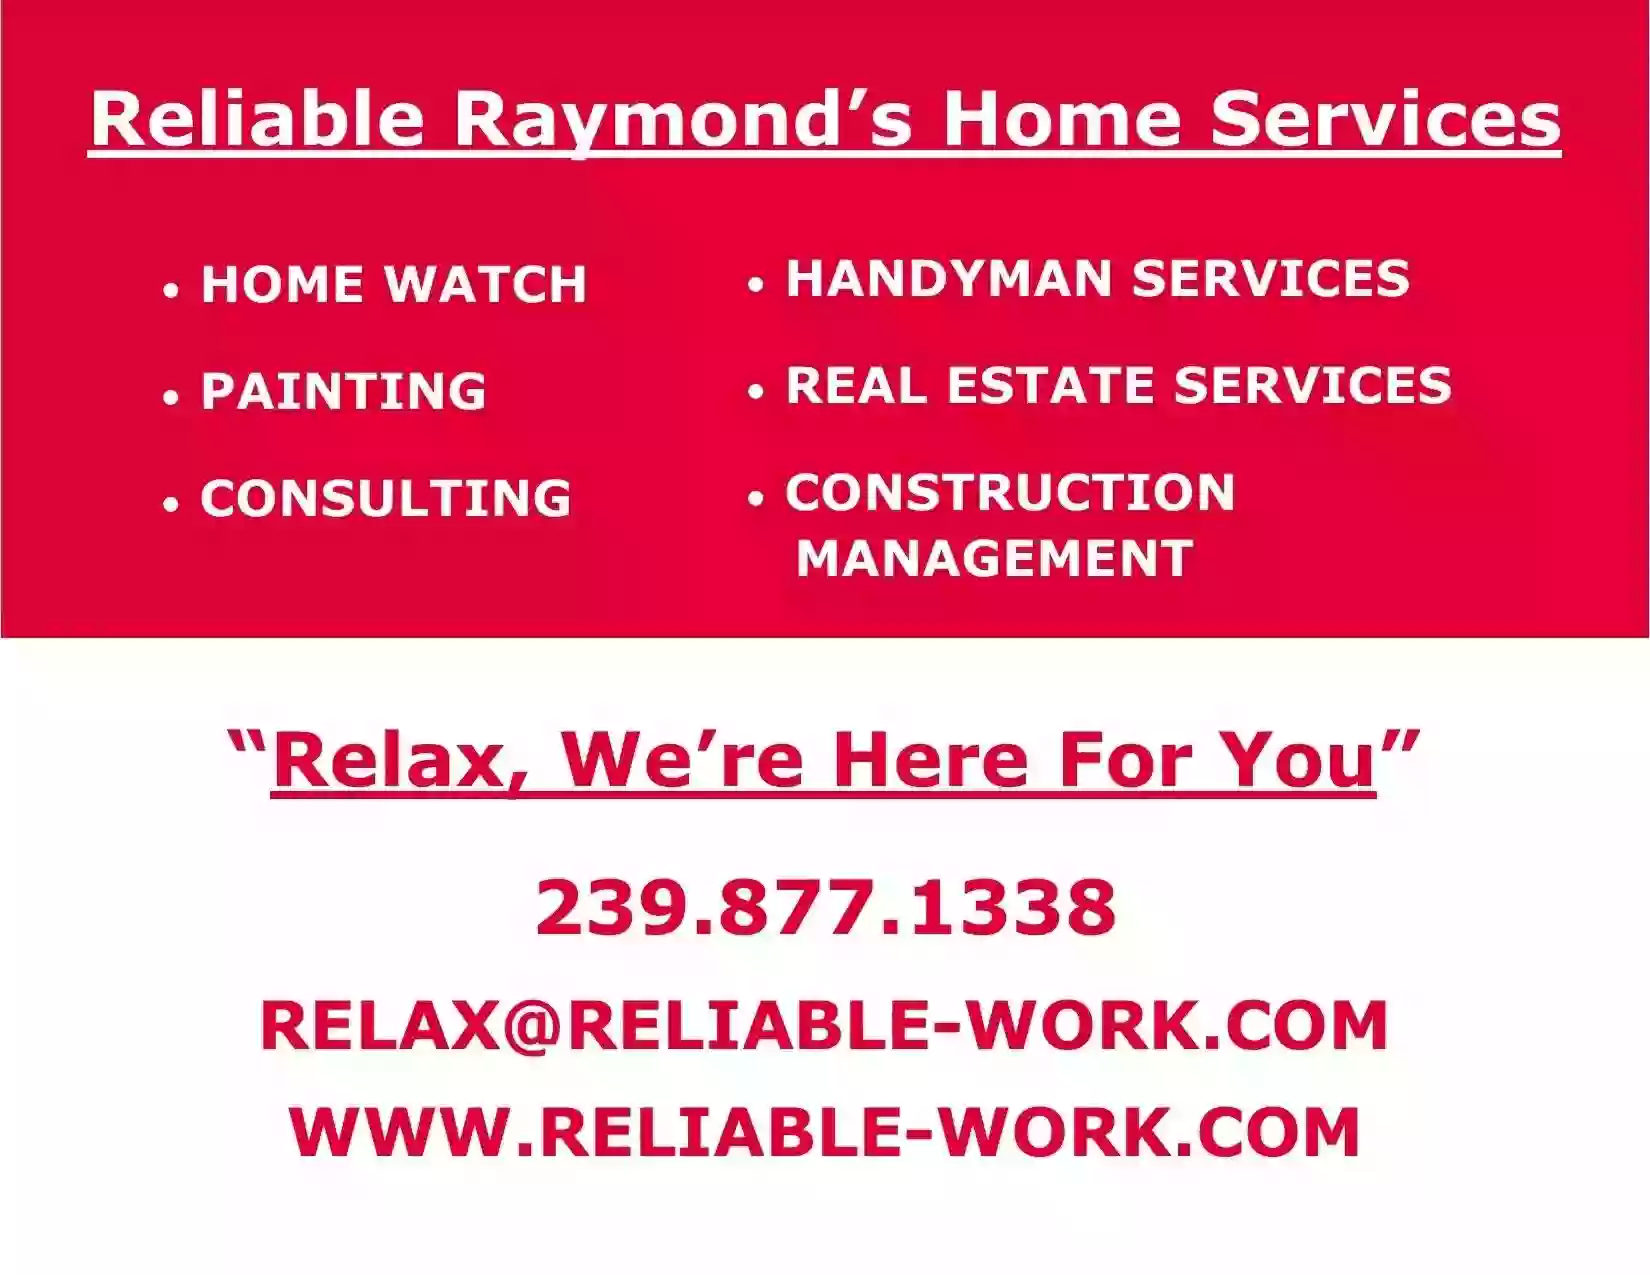 Reliable Raymond's Home Services